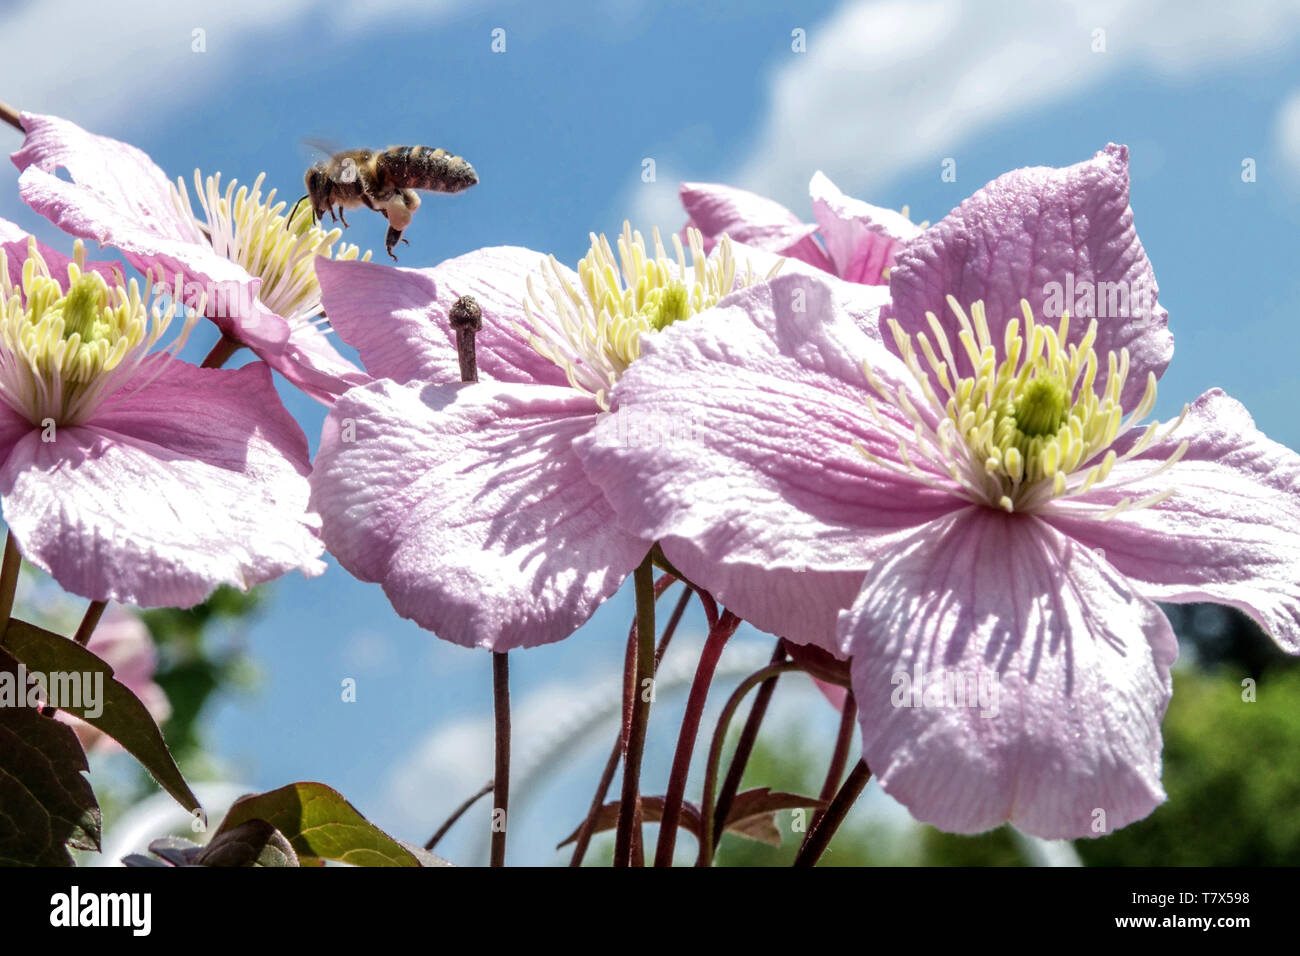 Clematis montana 'Rubens', close up bee on flower, pink blossoms Bee Clematis rubens Stock Photo